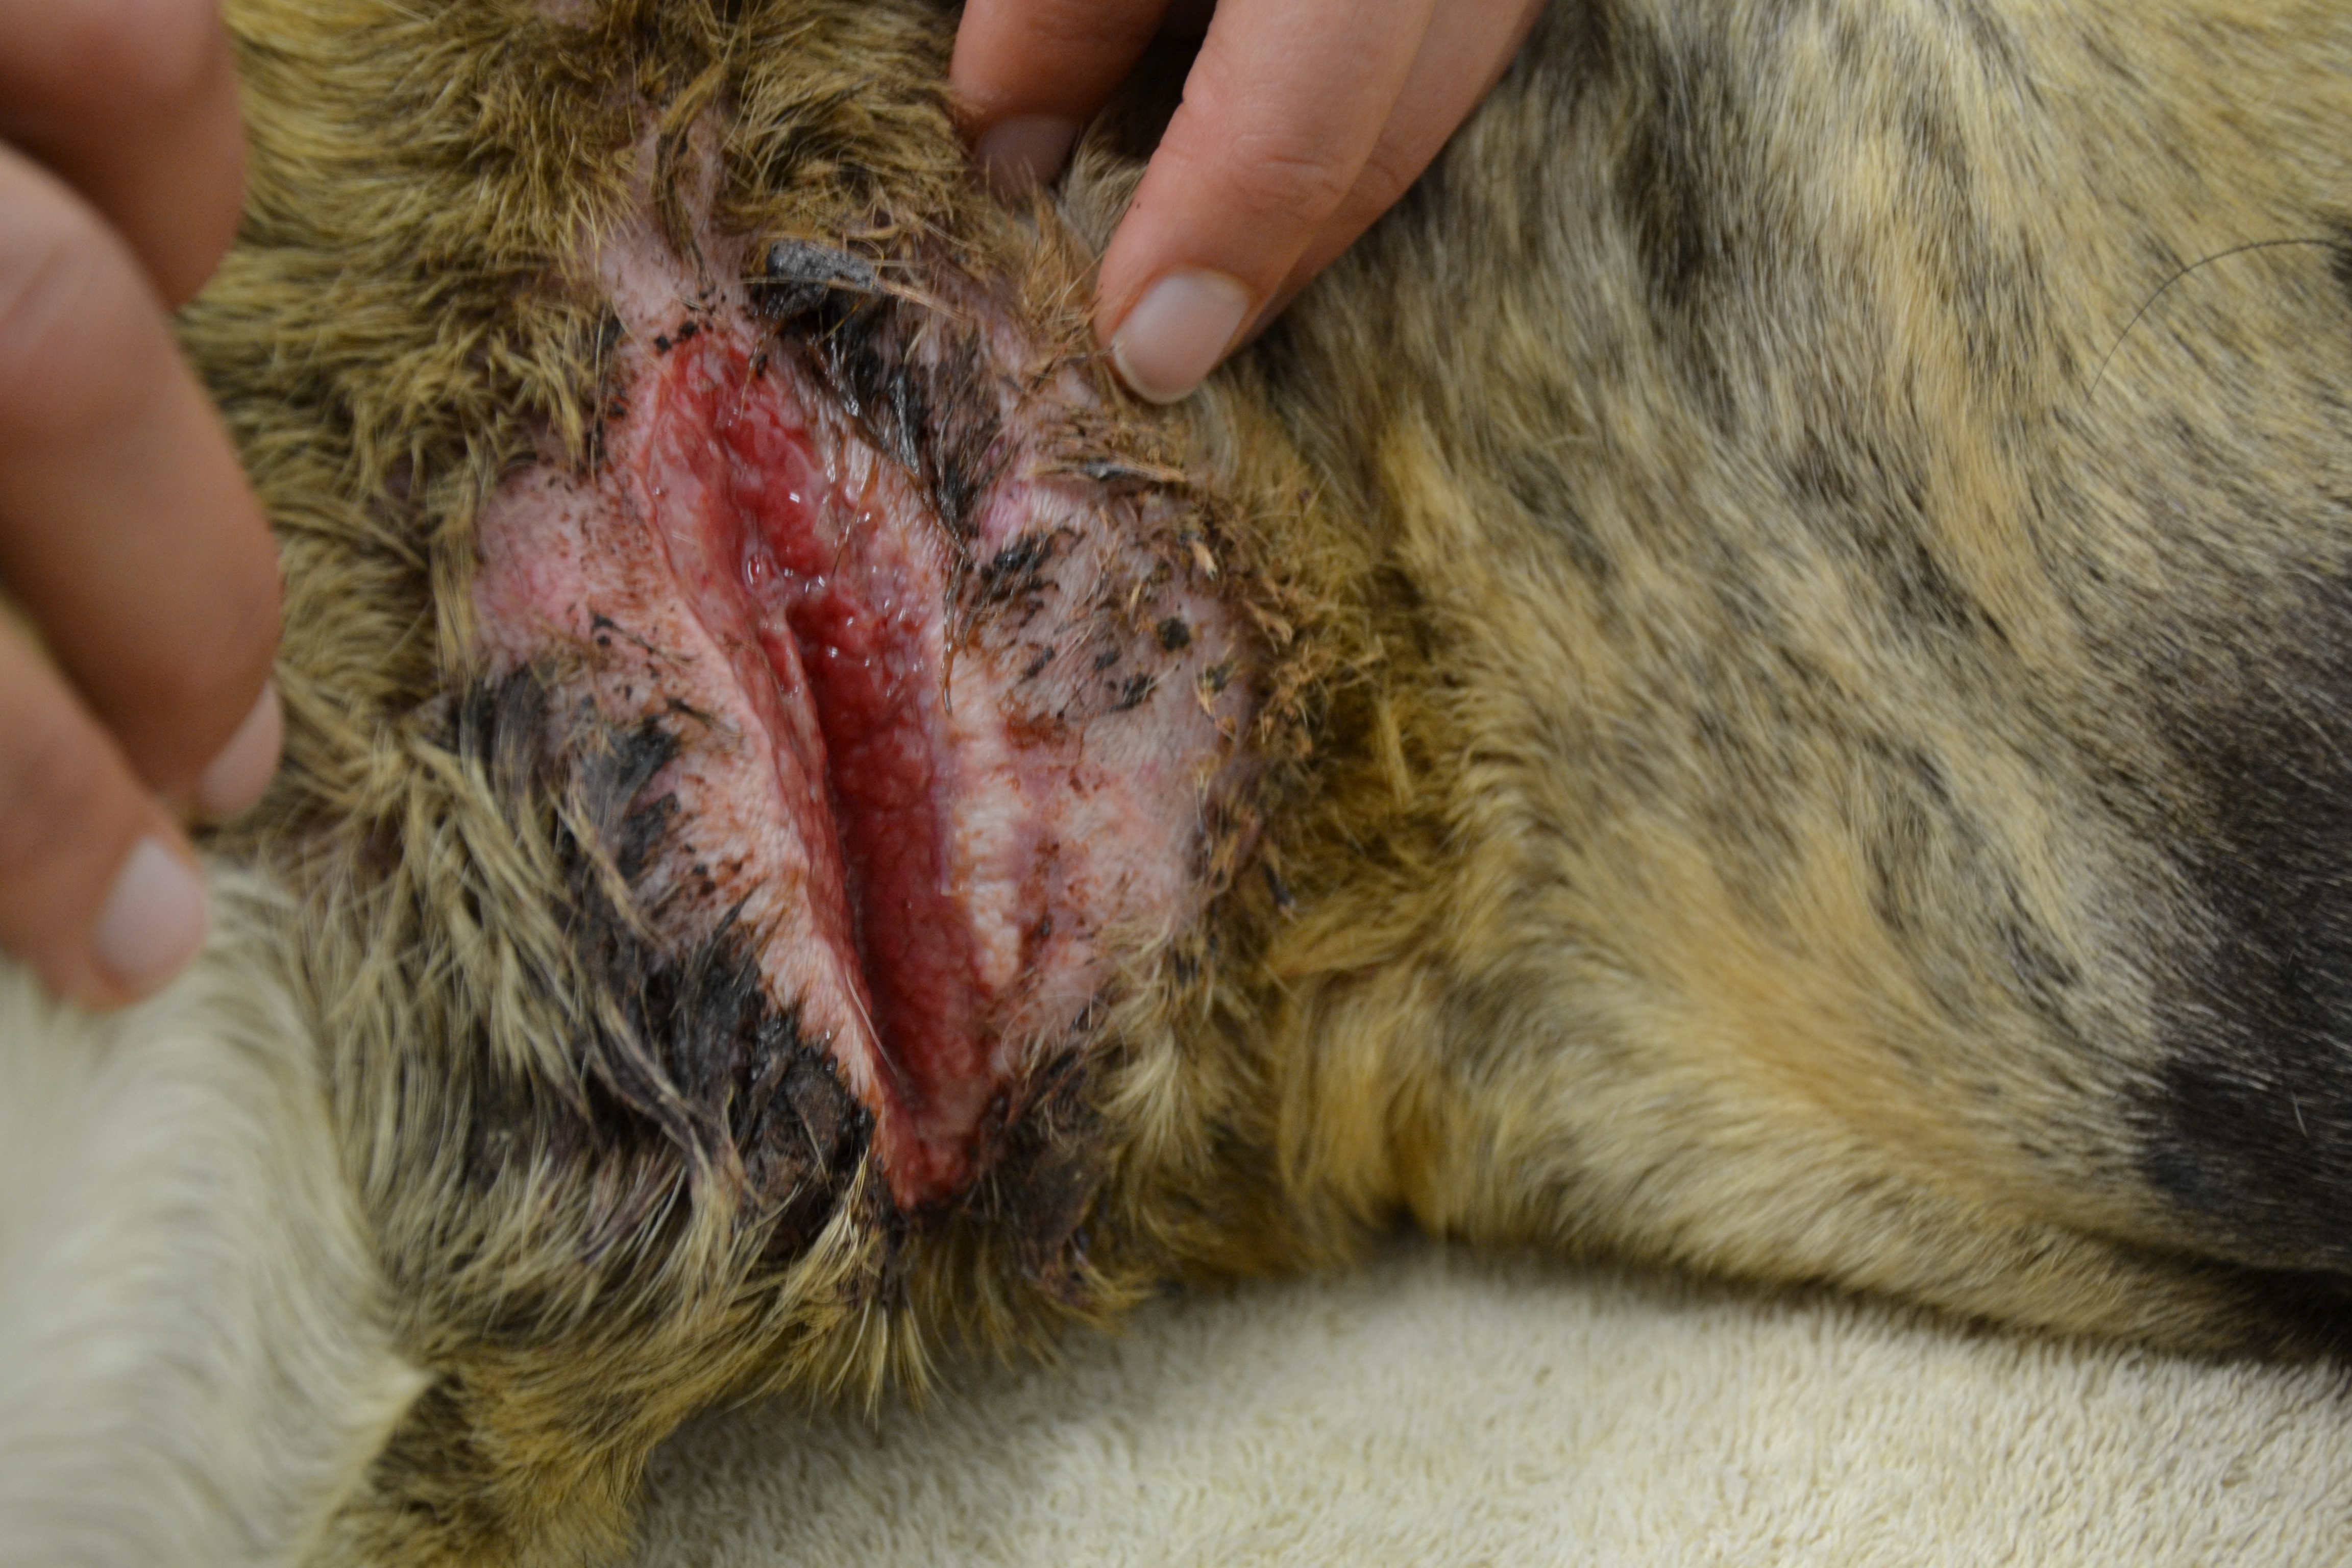 The underside of the dog’s throat.